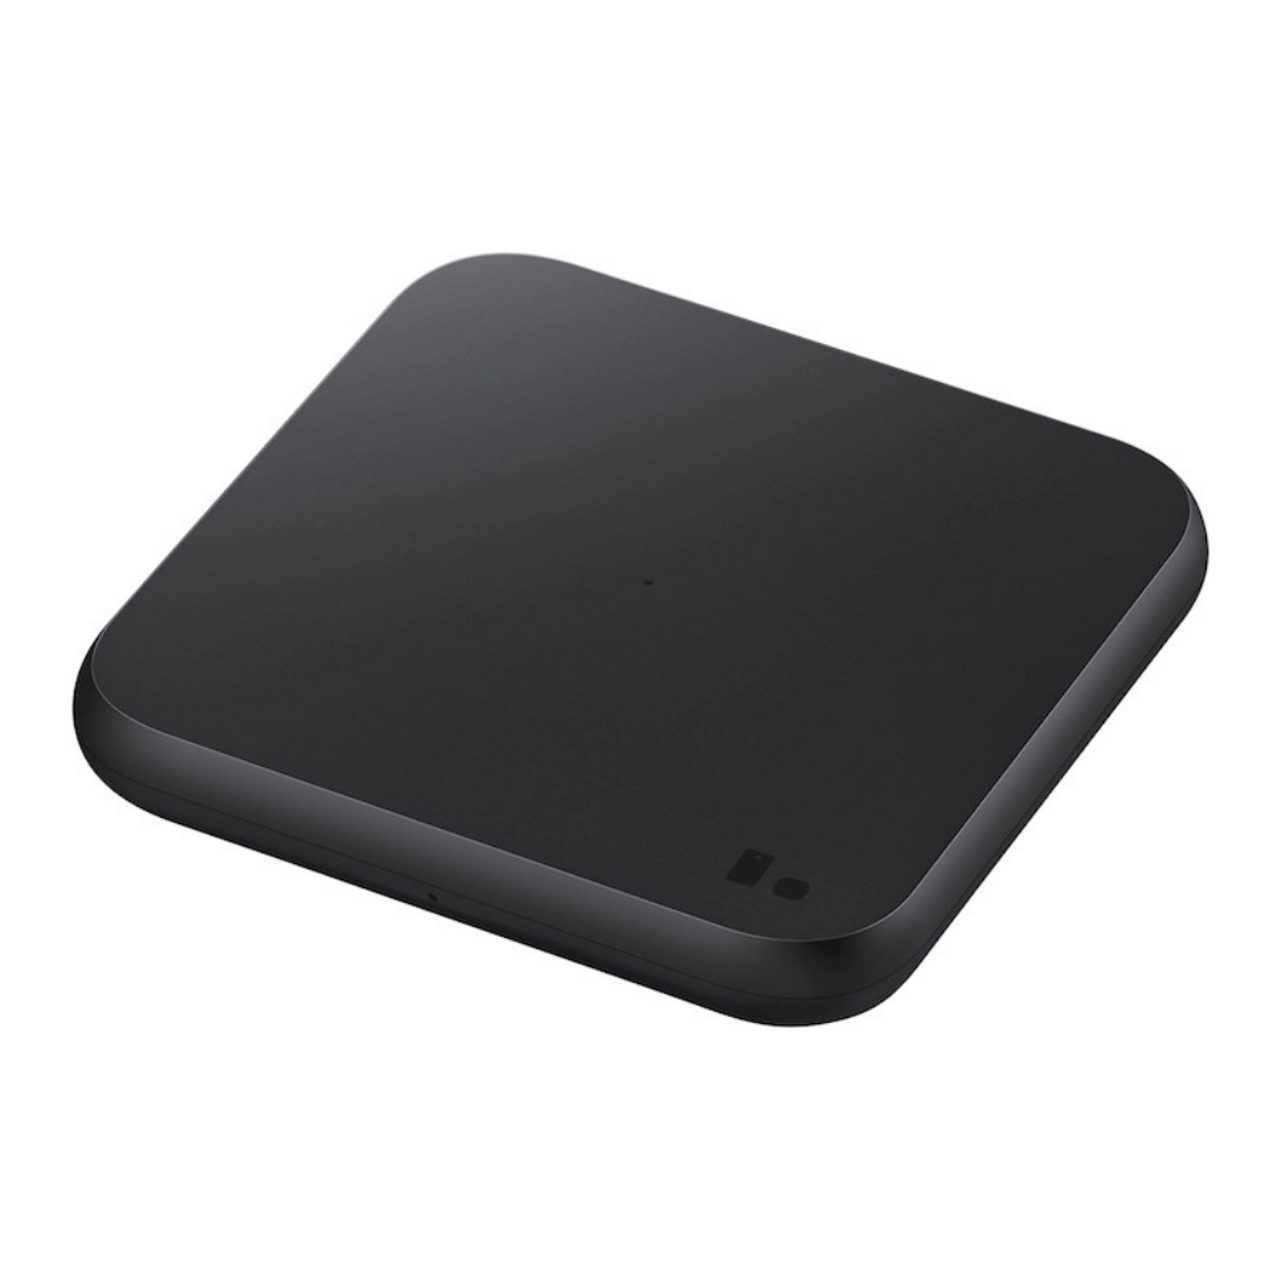 Samsung Wireless Charger Pad product image